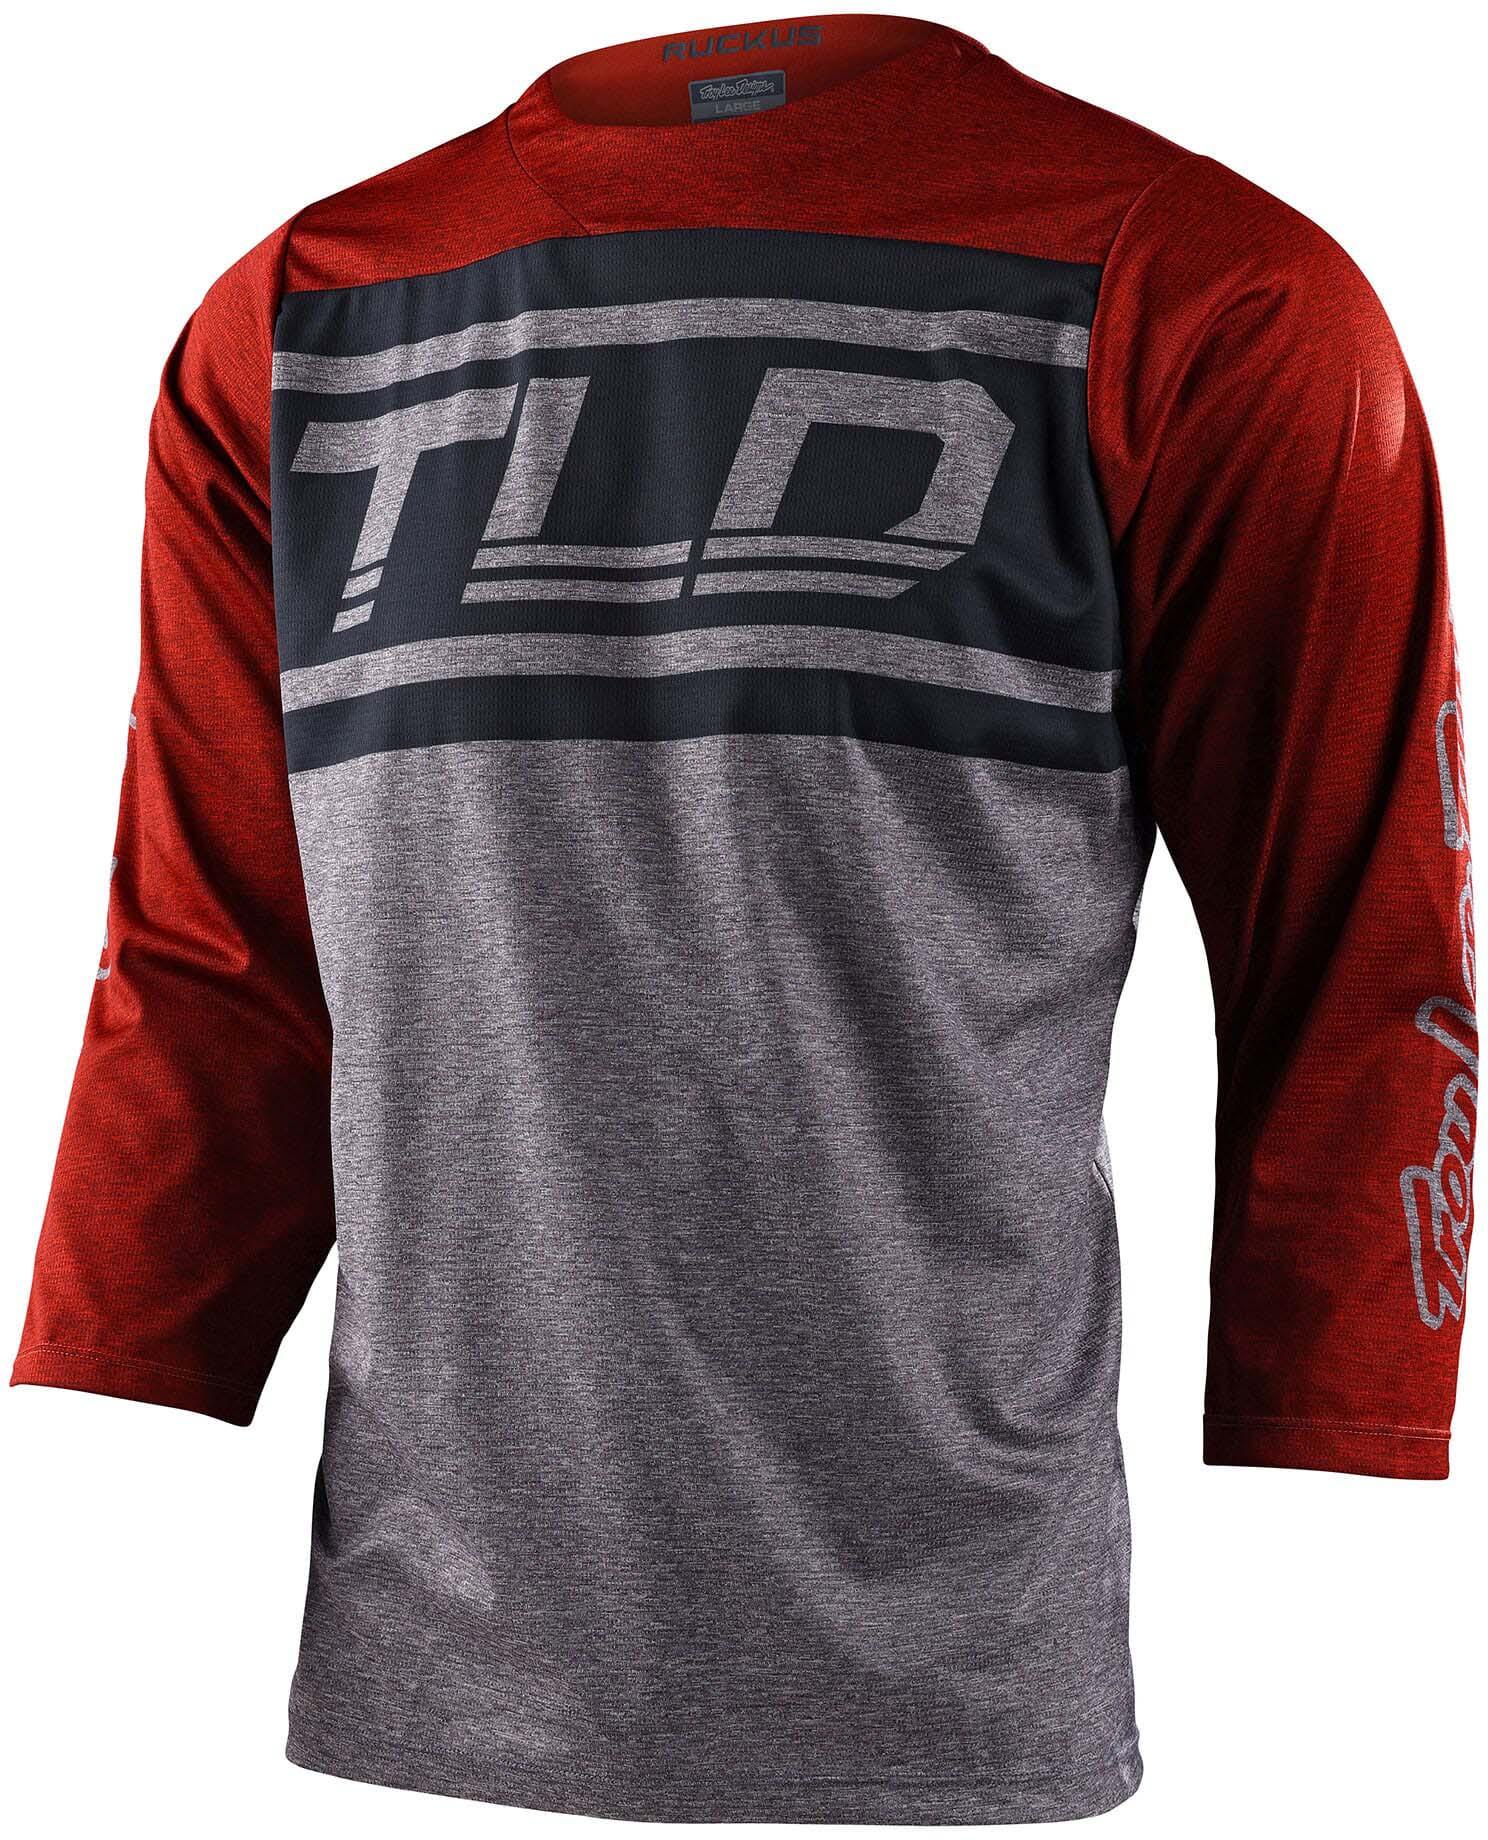 Troy Lee Designs Ruckus Jersey - Bars Red Clay/grey Heather